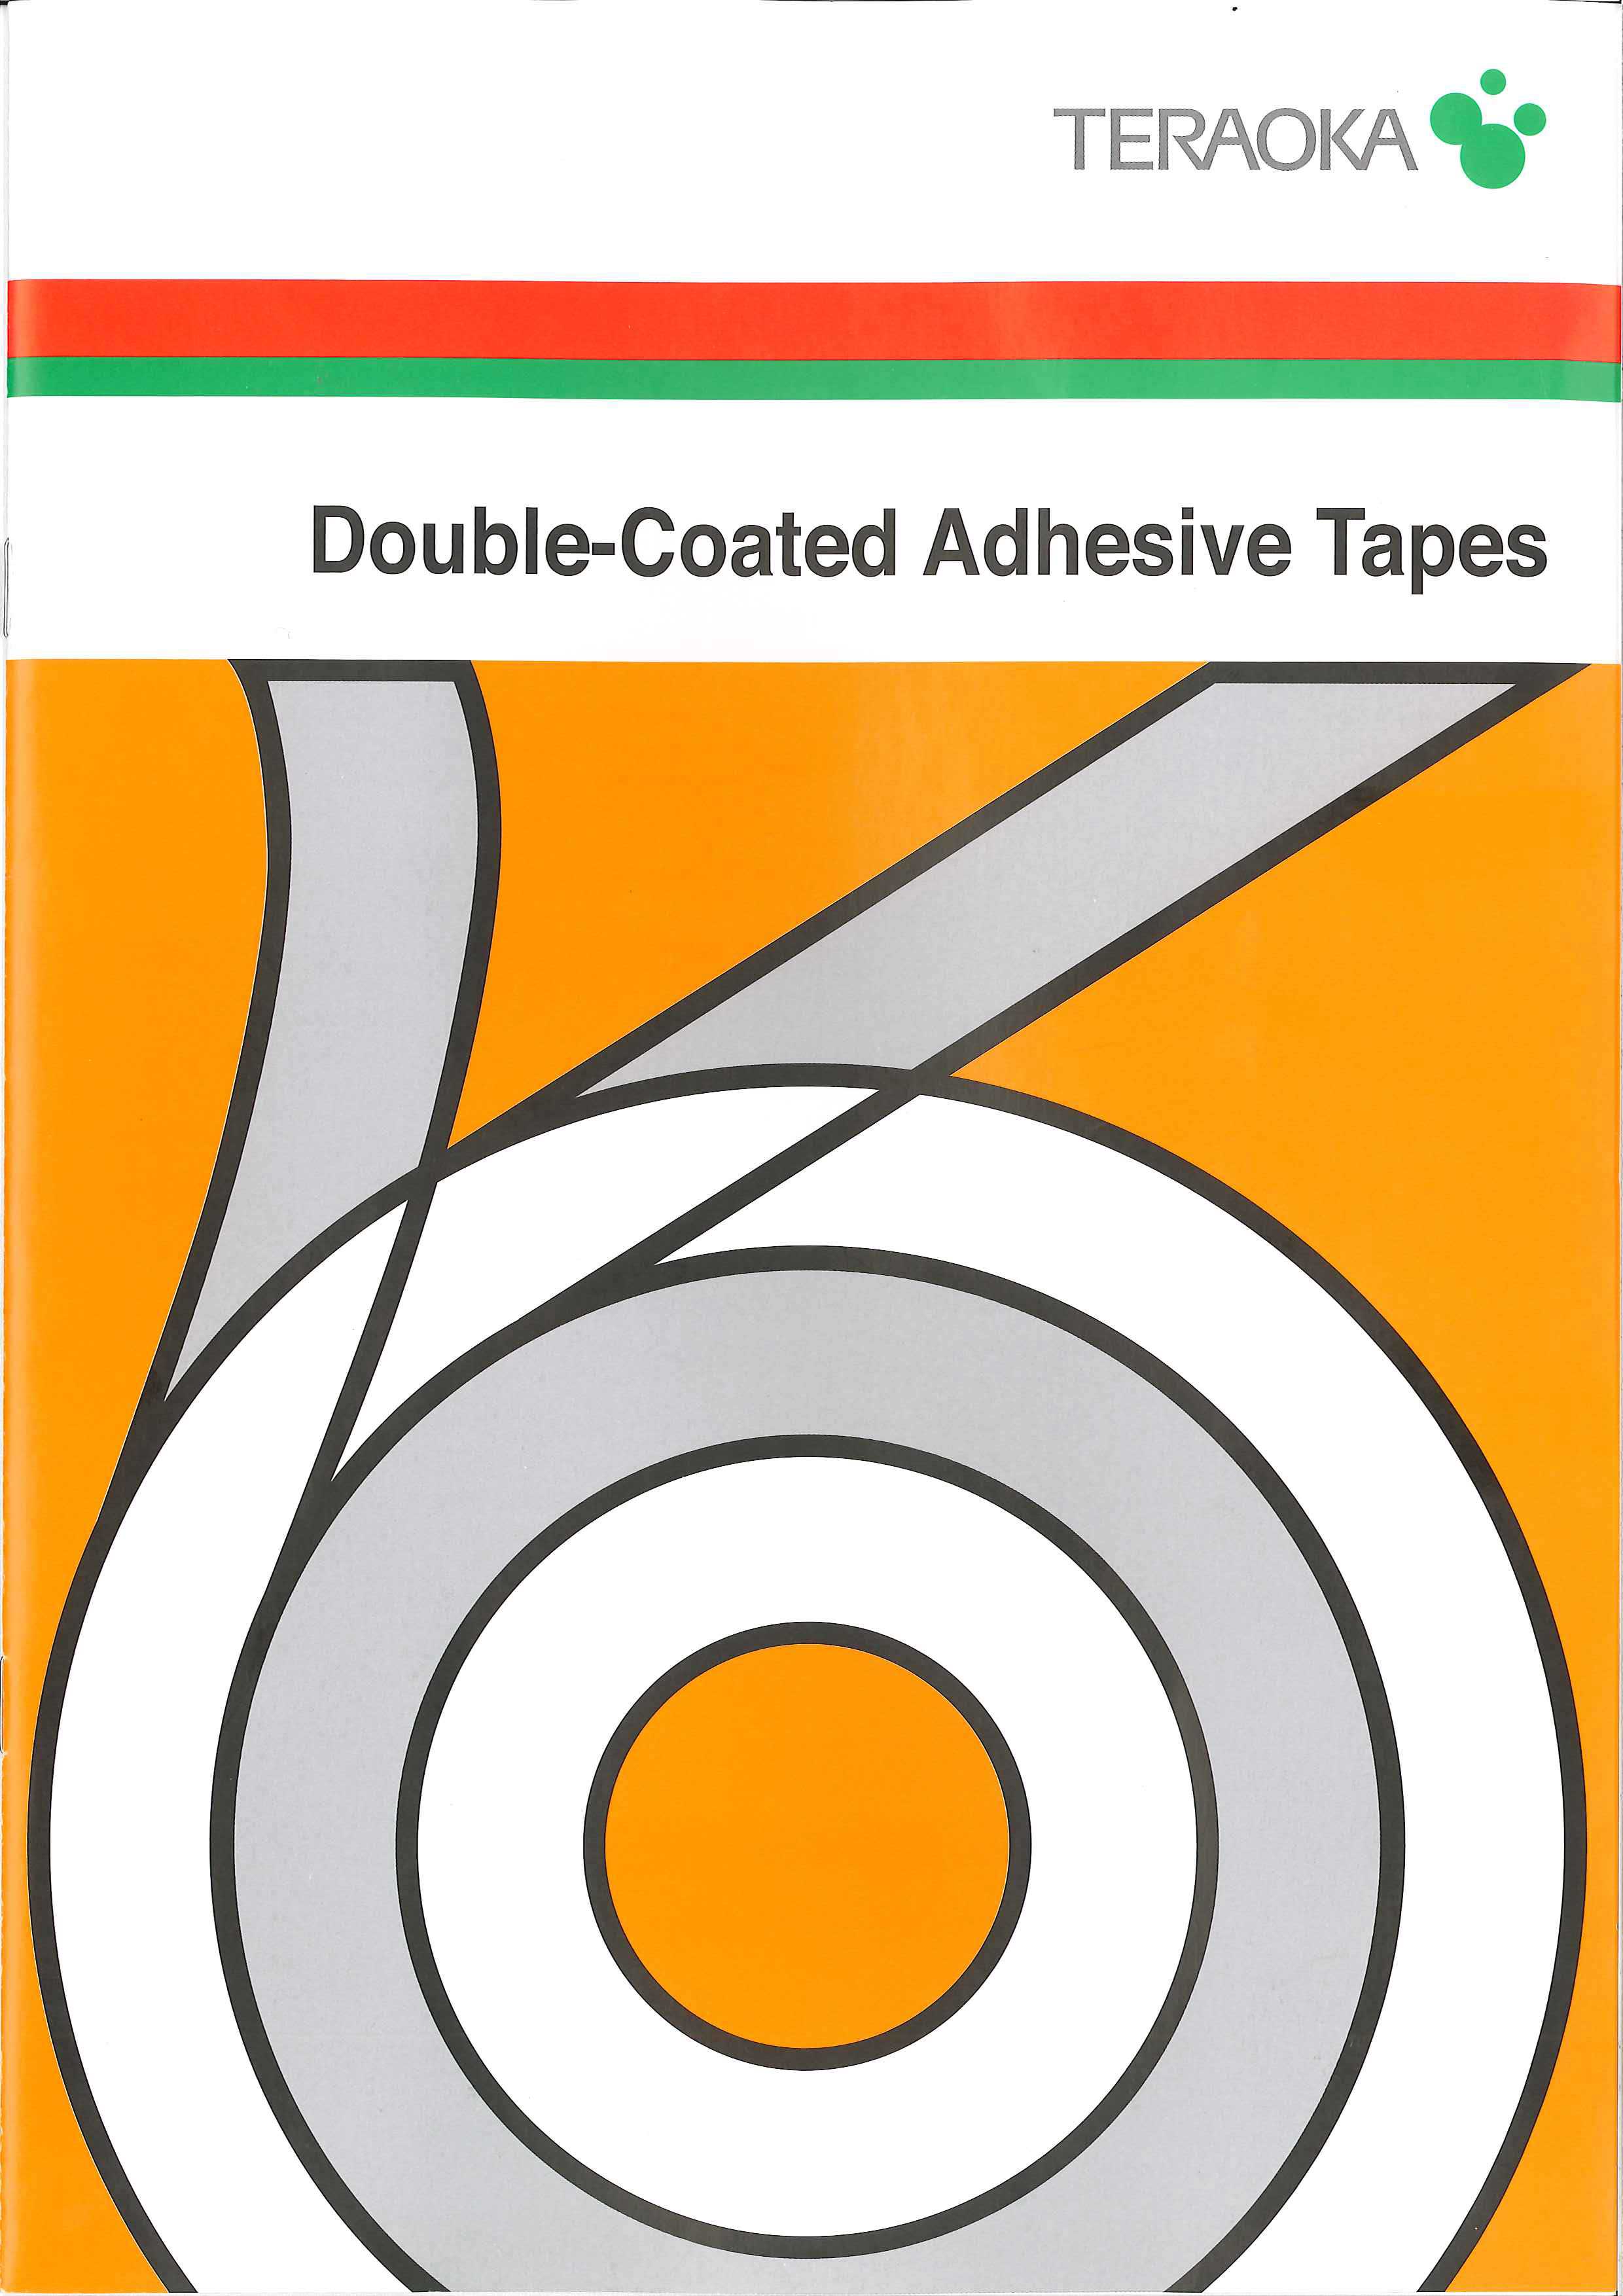 Double-Coated Adhesive Tapes